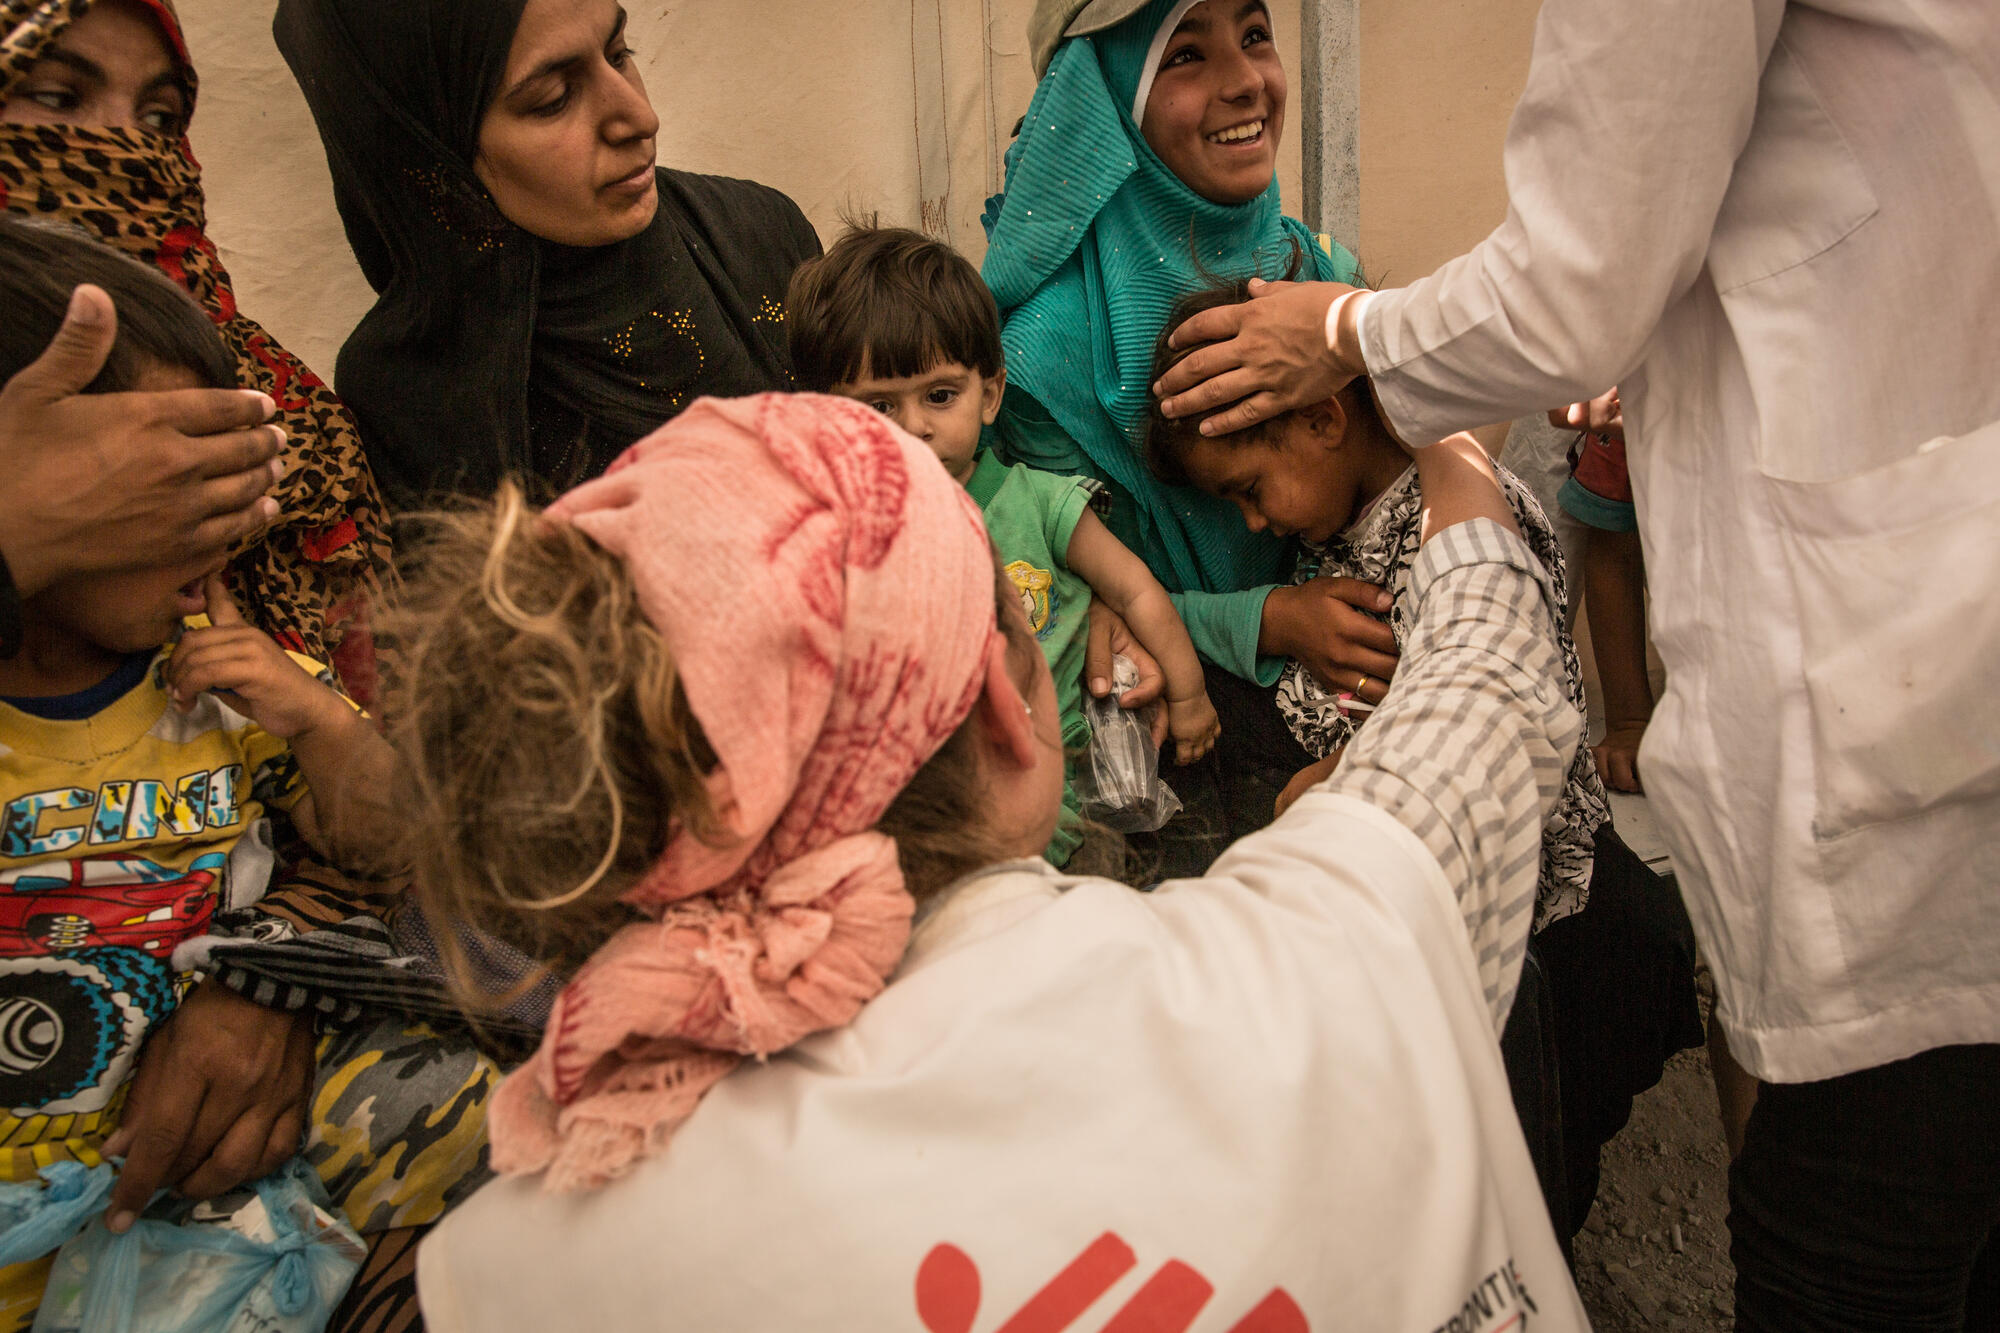 July 2017. MSF Clinic in Aïn Issa Displaced Camp, Kurdish province,Syria. Emilie, a French doctor, inspects a baby who has a fever before proceeding with a medical consultation. His mother is displaced from Raqqa. ©Chris Huby